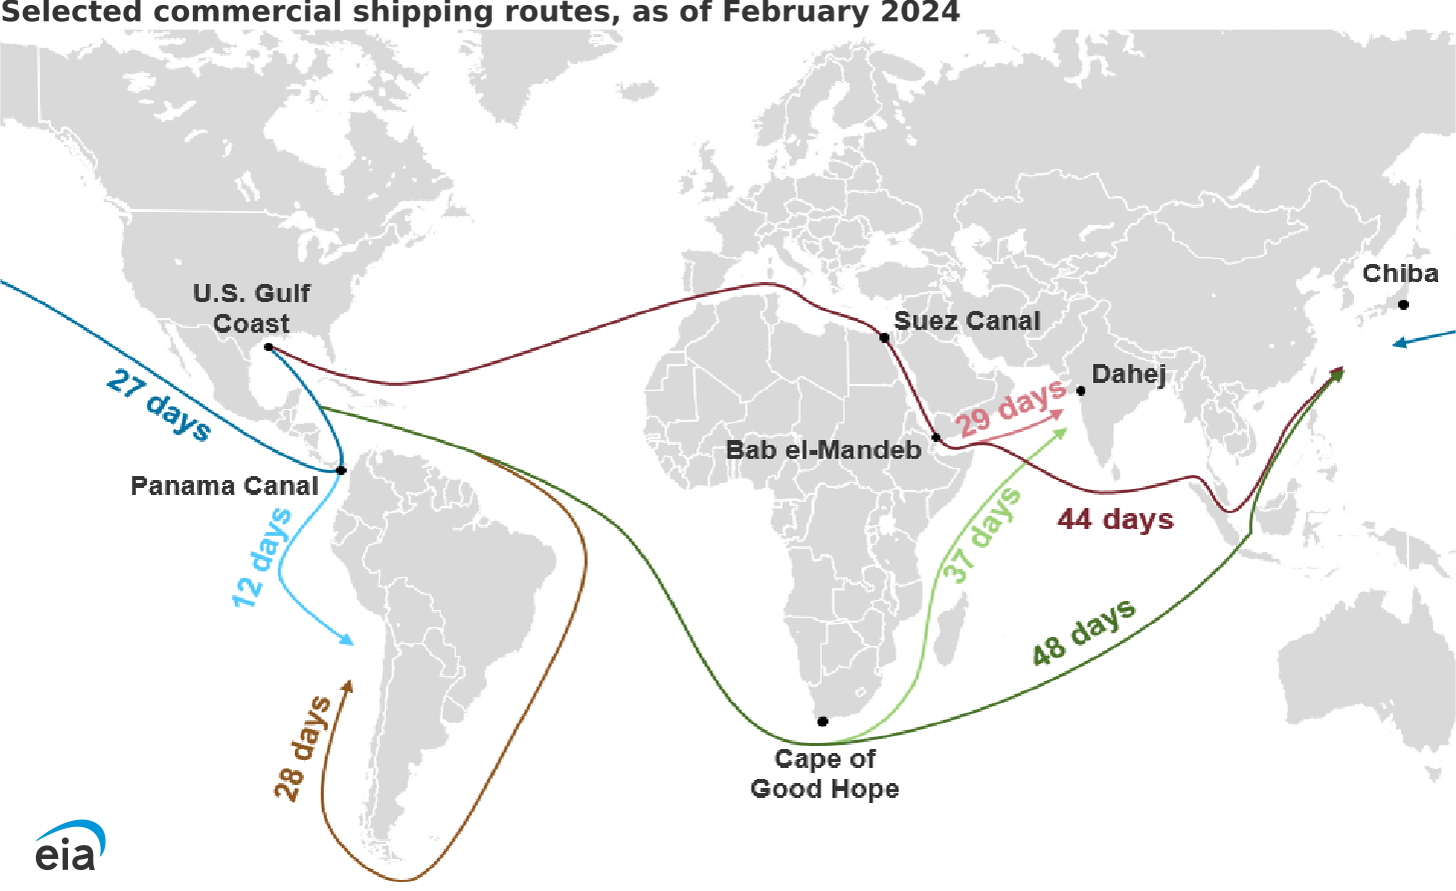 map of shipping voyage times